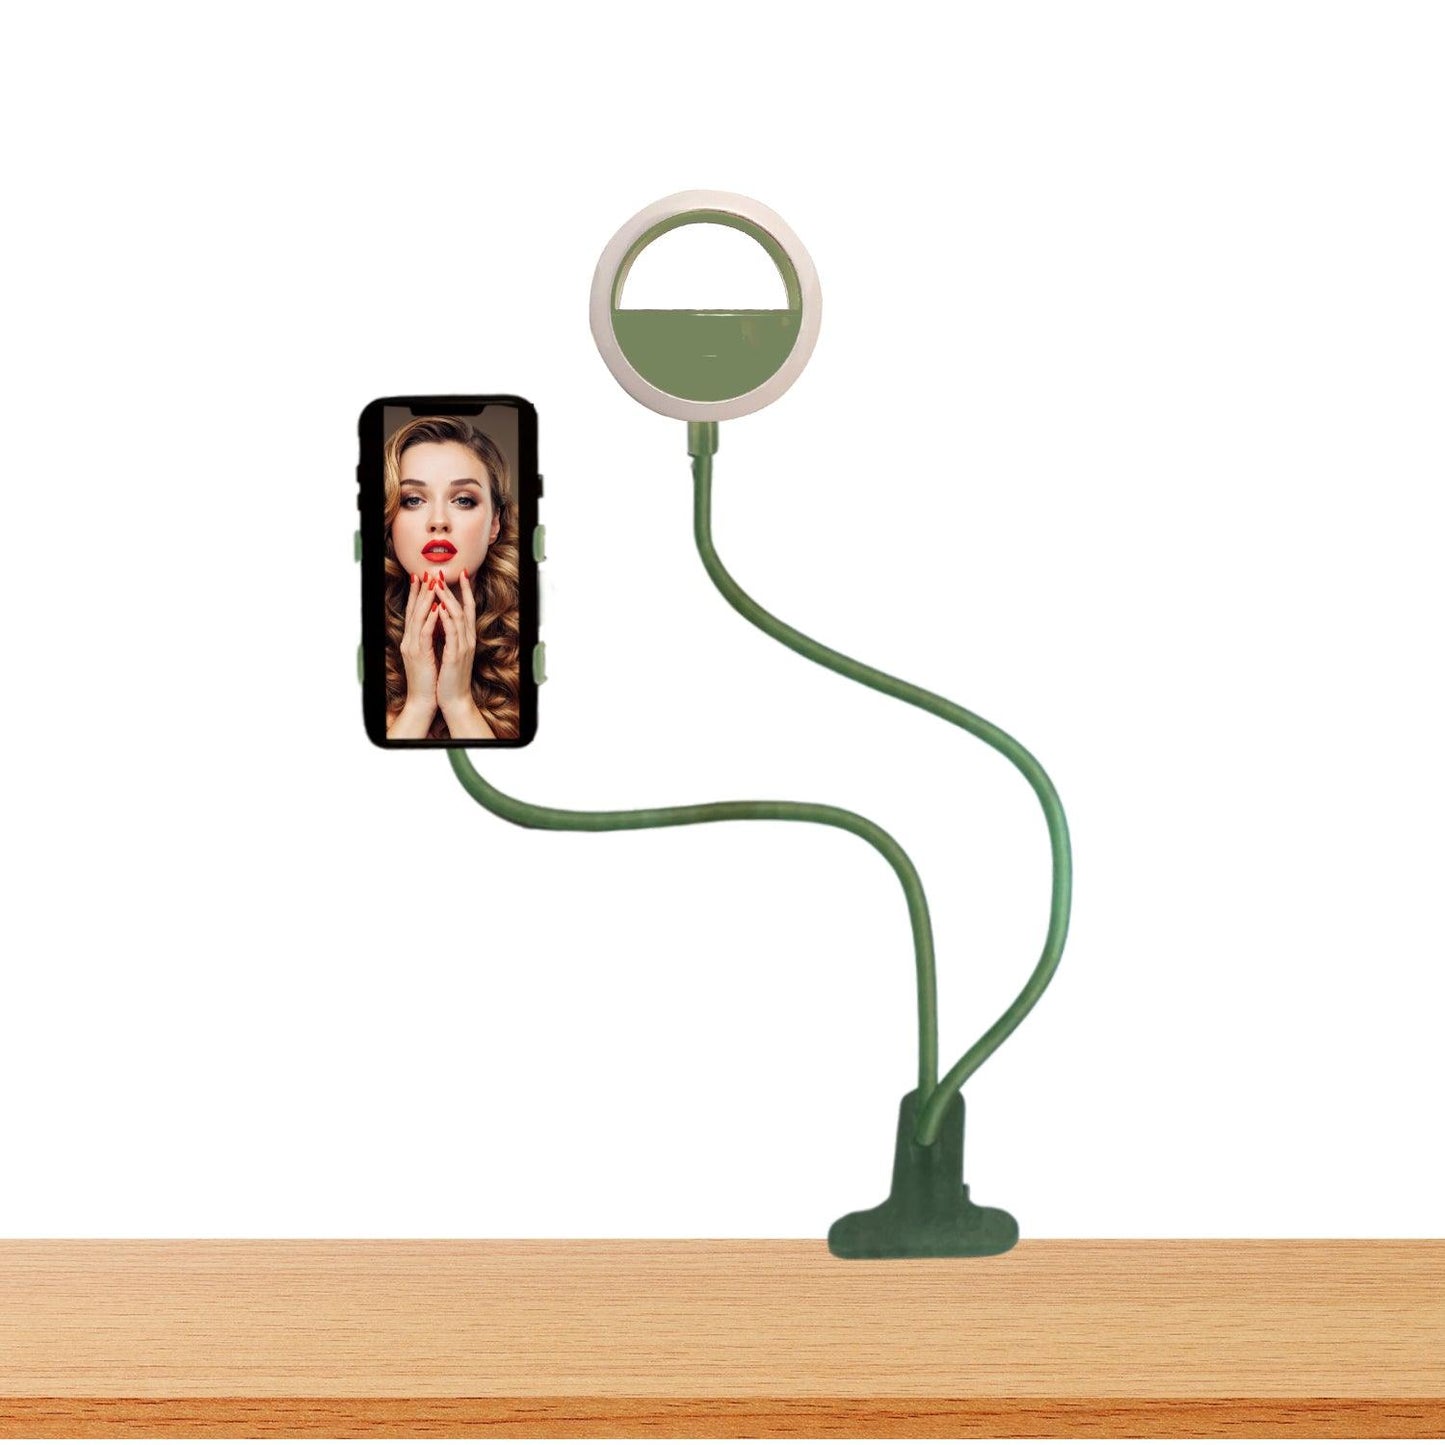 Woman use a Teal Flexible Arm Phone Holder Ring Light 